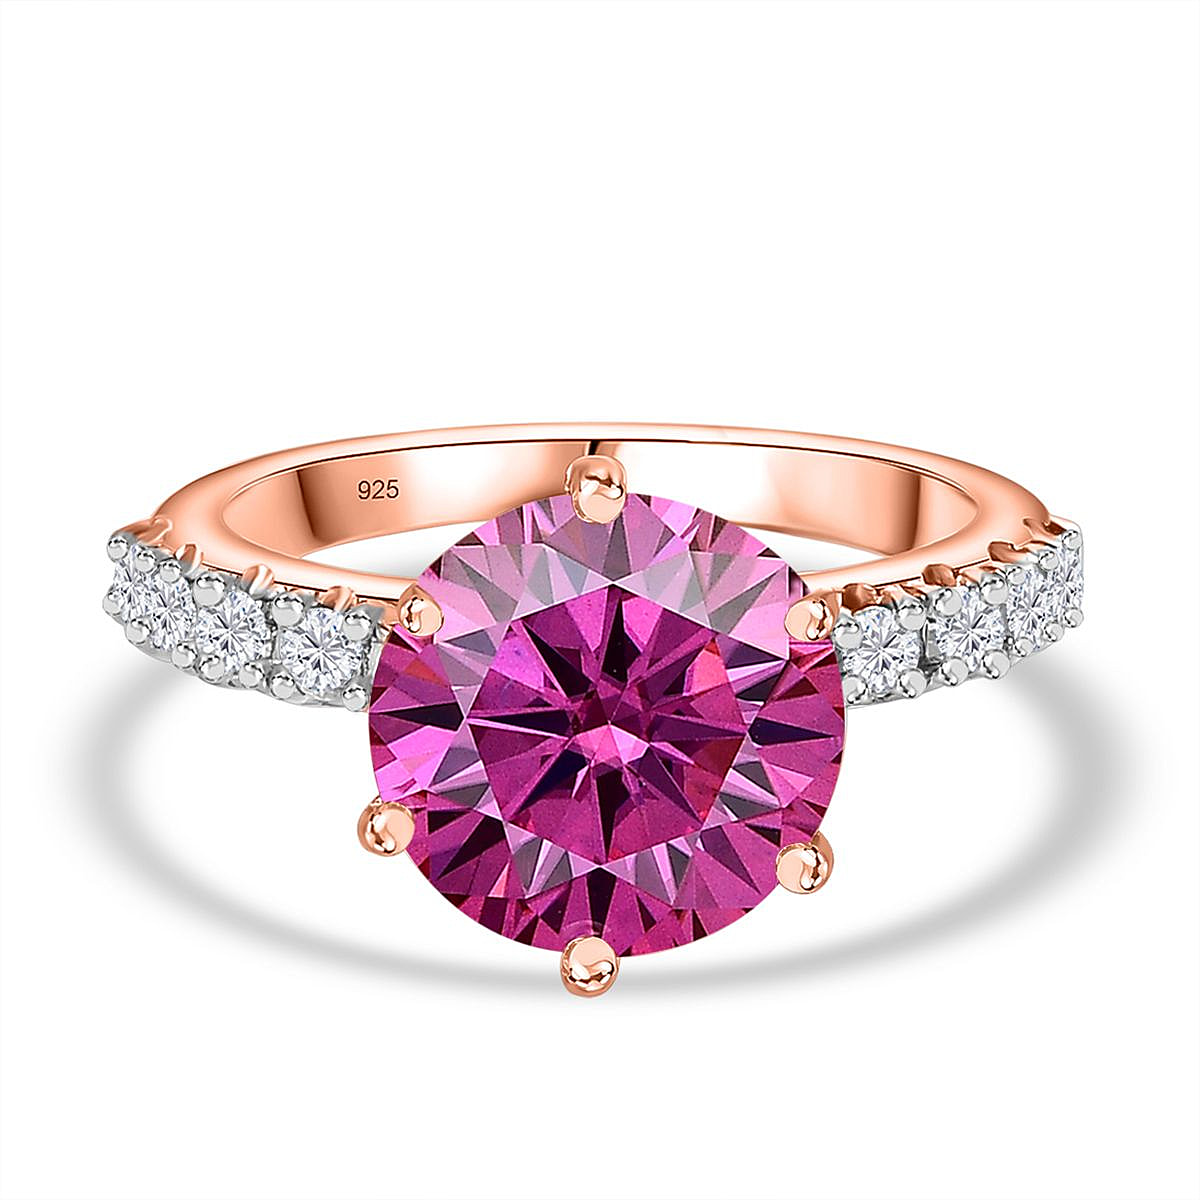 Pink & White Moissanite Ring in 18K Rose Gold Vermeil Plated Sterling Silver 3.73 Ct.